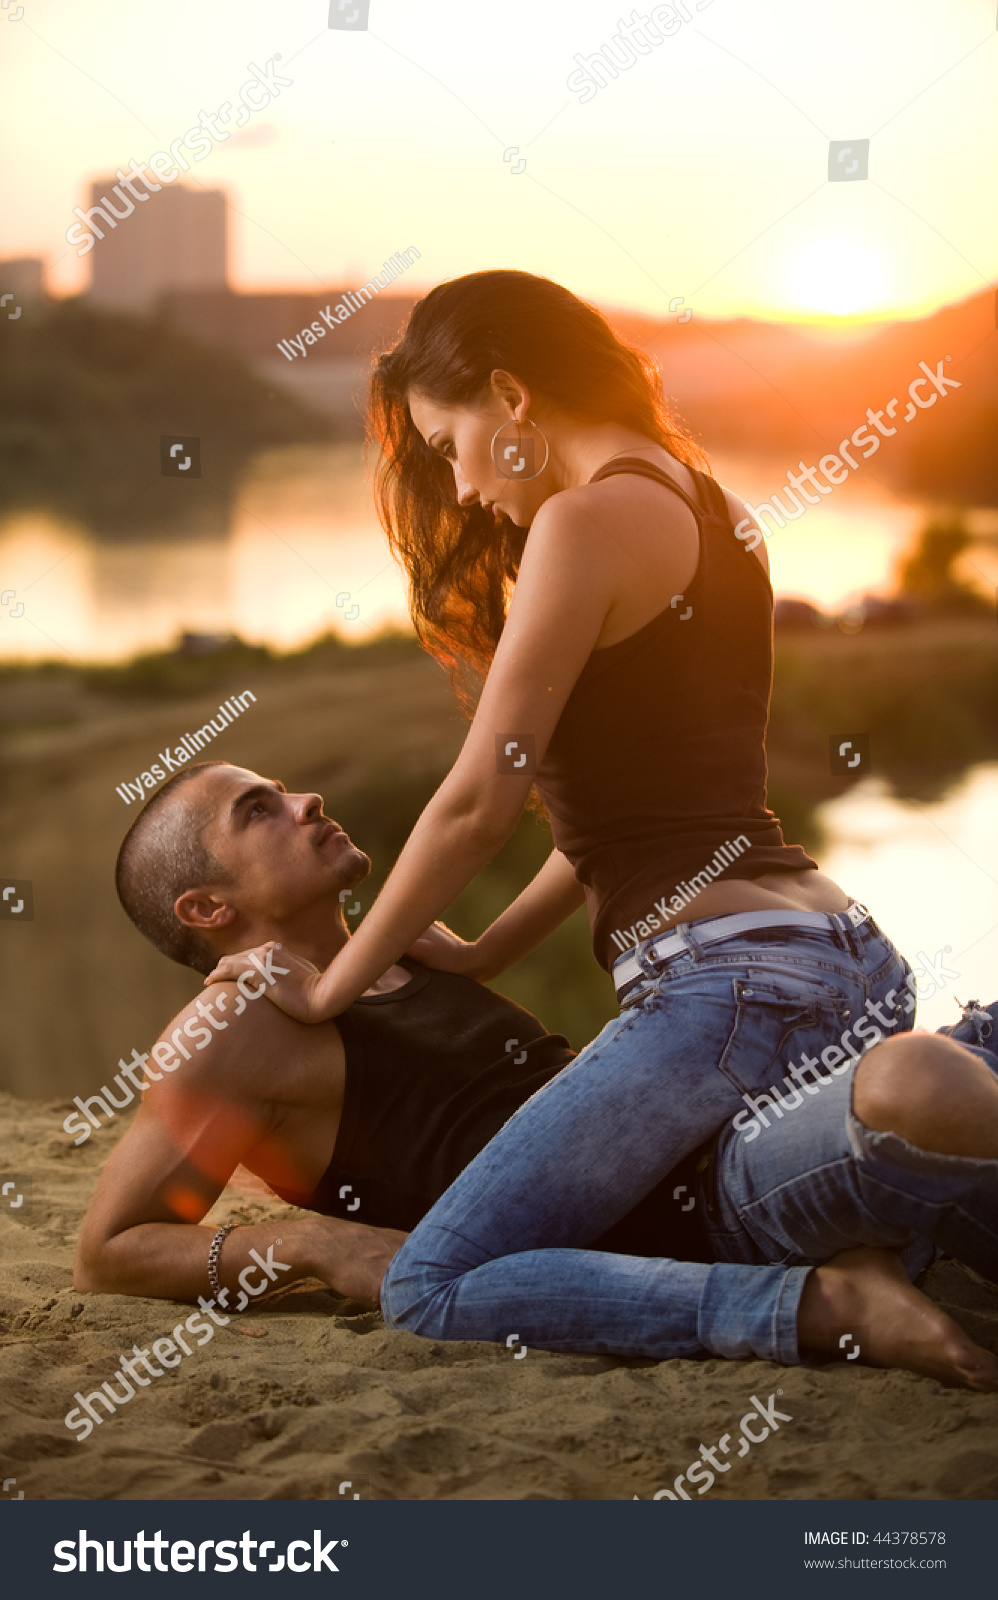 Woman straddling man Images, Stock Photos & Vectors Shutterstock.